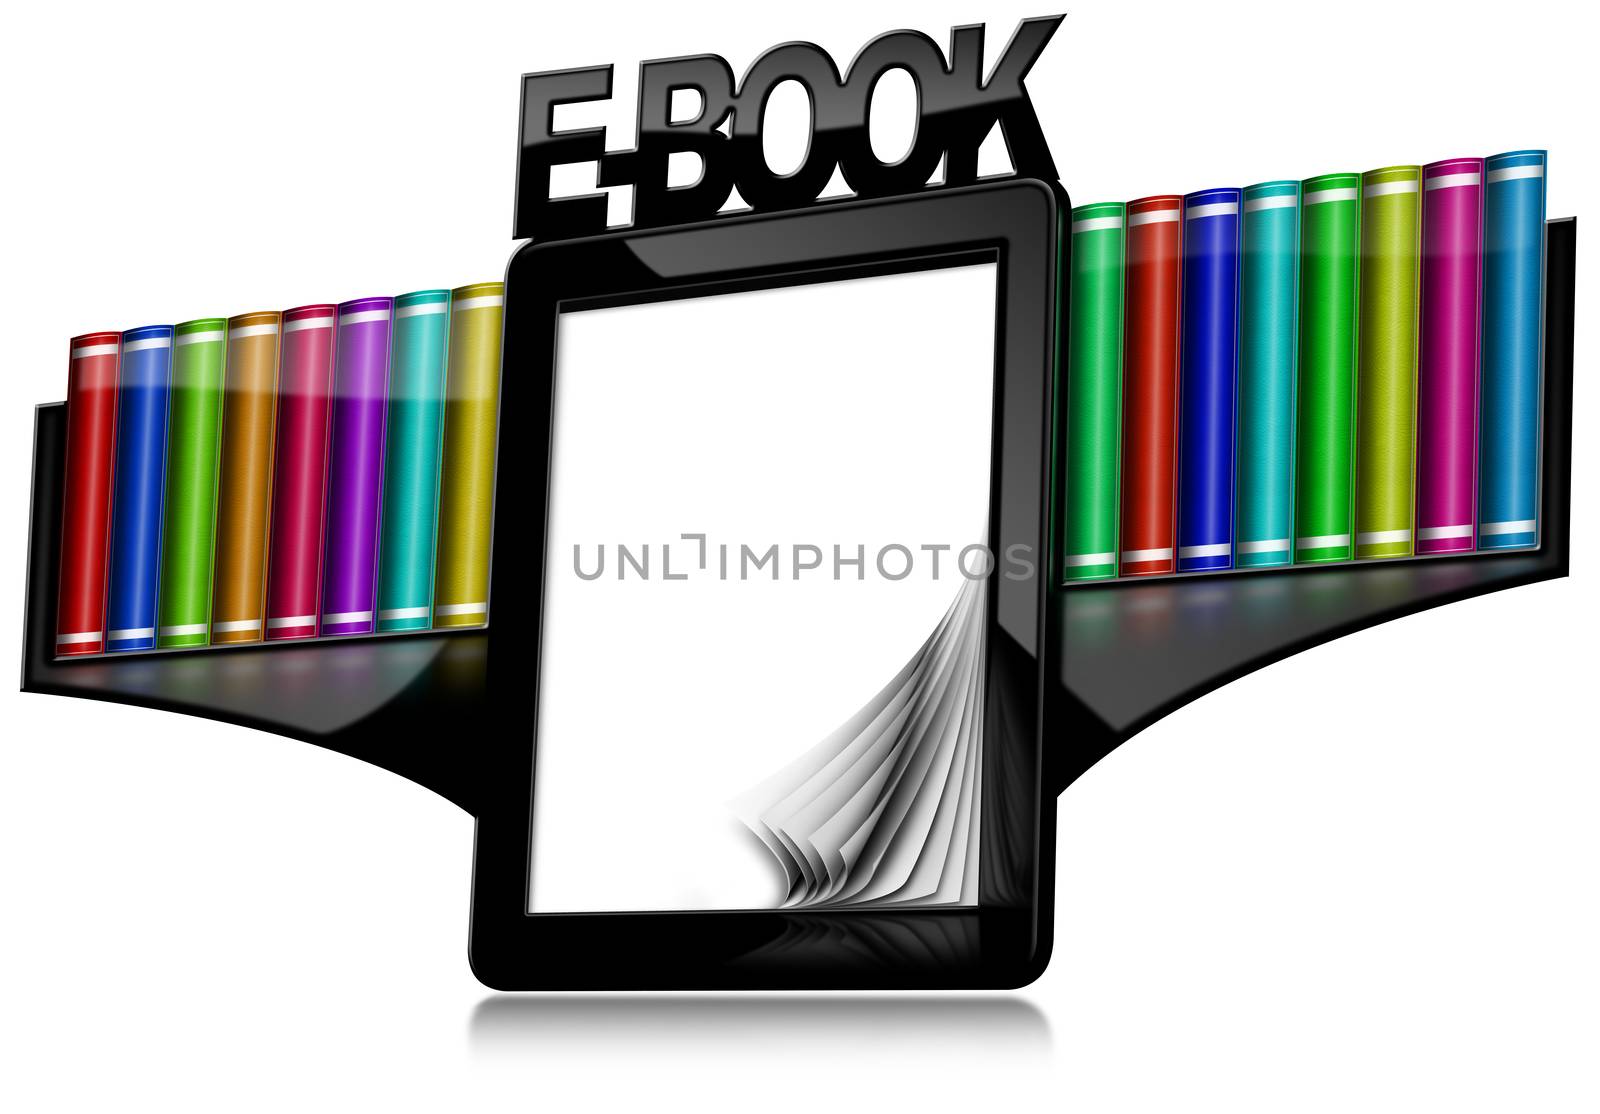 Black ebook reader with blank curled pages, text Ebook and a library with colorful books to the sides. Isolated on white background